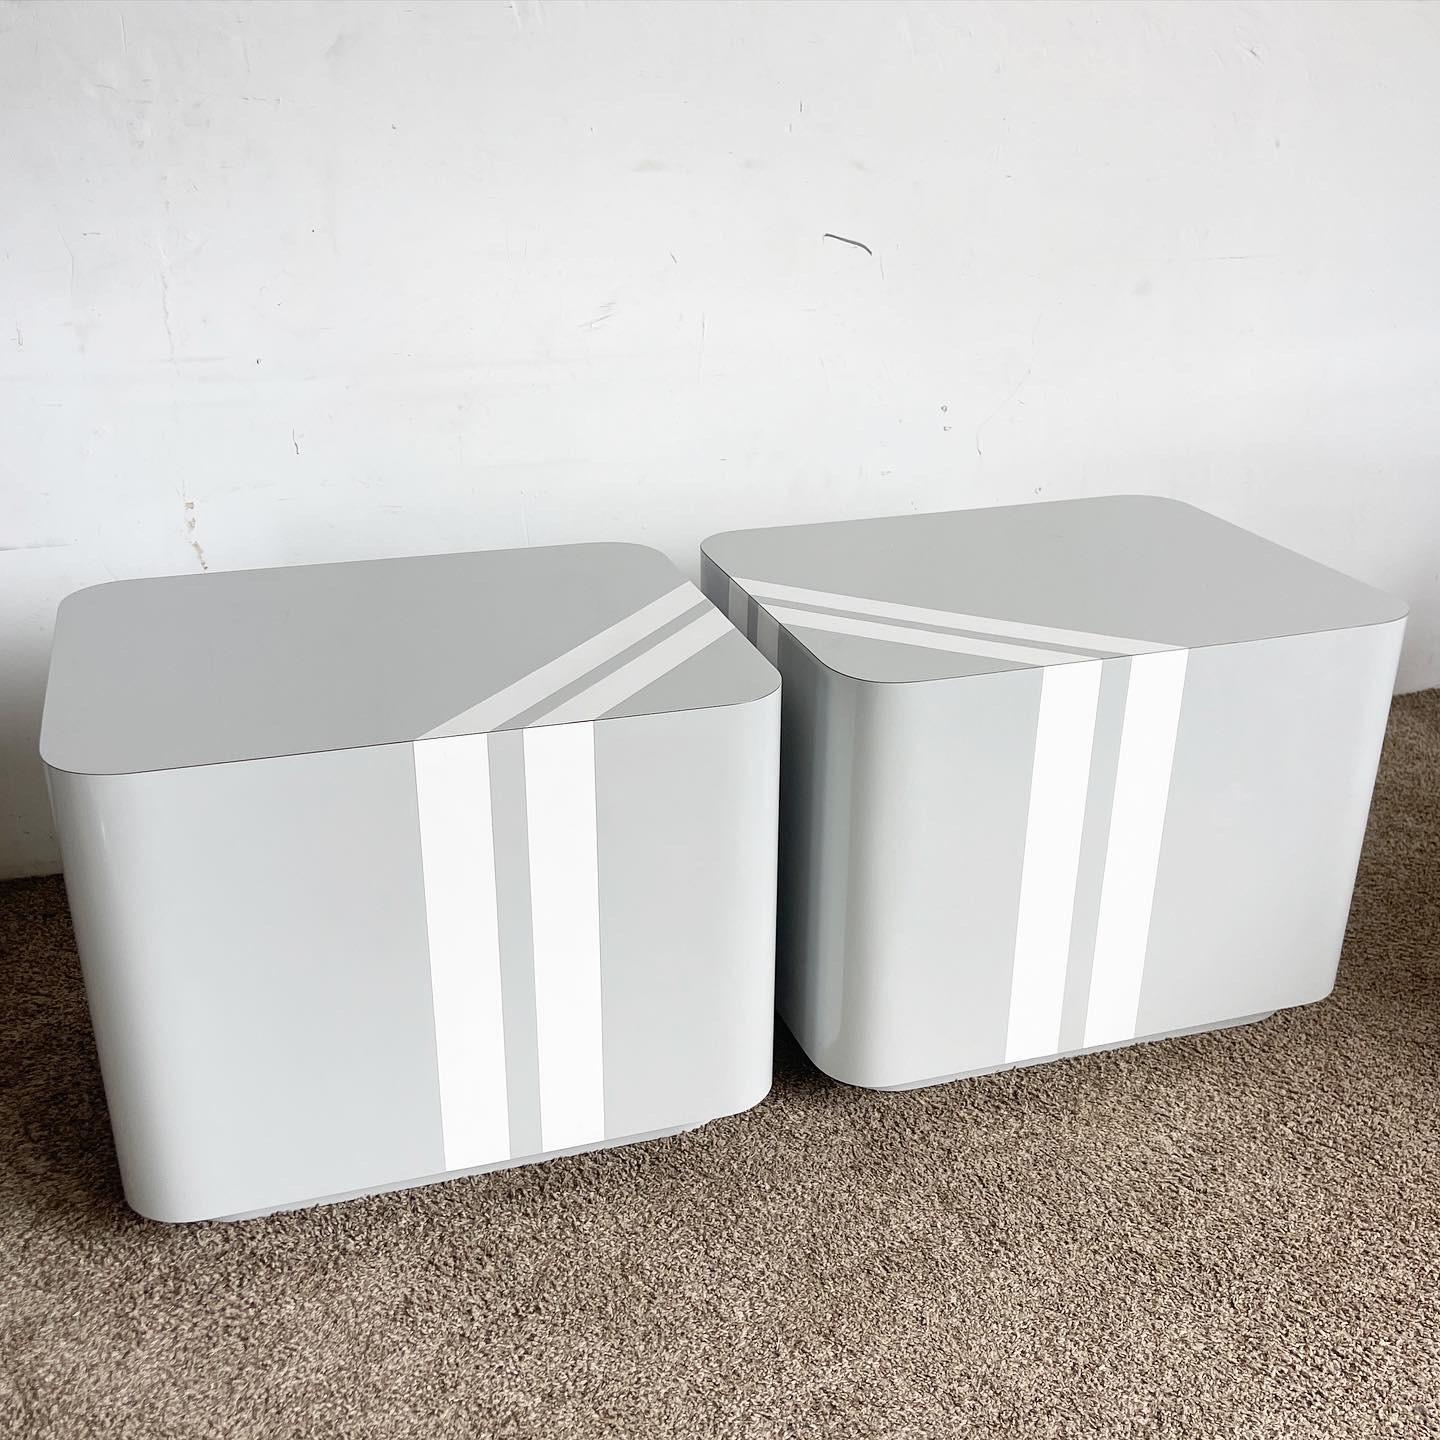 Discover contemporary flair with our Grey and White Striped Lacquer Laminate Side Tables, combining chic design with functionality for a unique aesthetic.

Striking grey and white striped design offers a visual pop.
Sleek lacquer finish for a